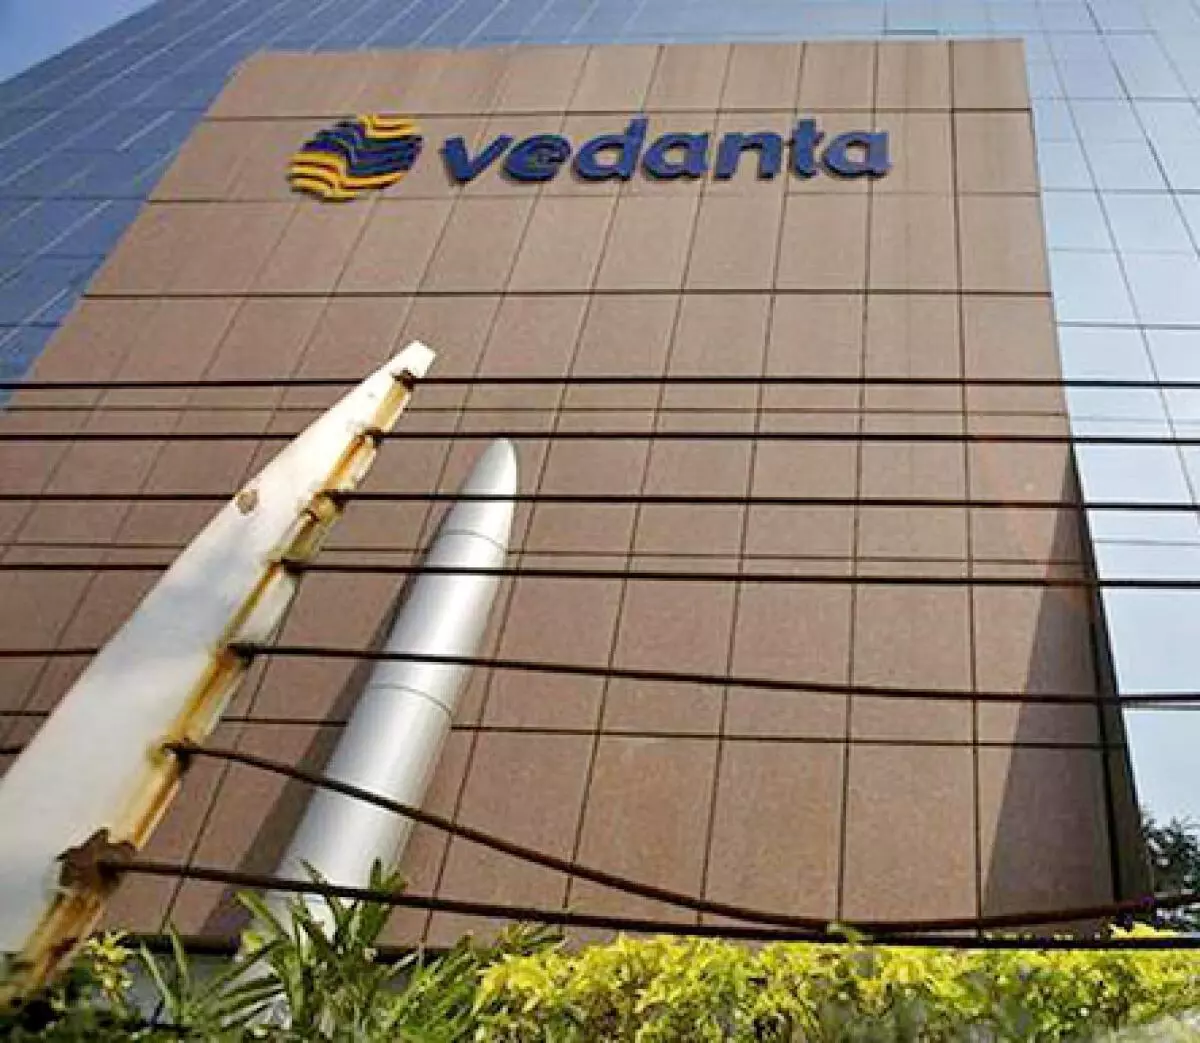 Vedanta has committed $5 billion over the next 10 years to accelerate transition to net-zero operations